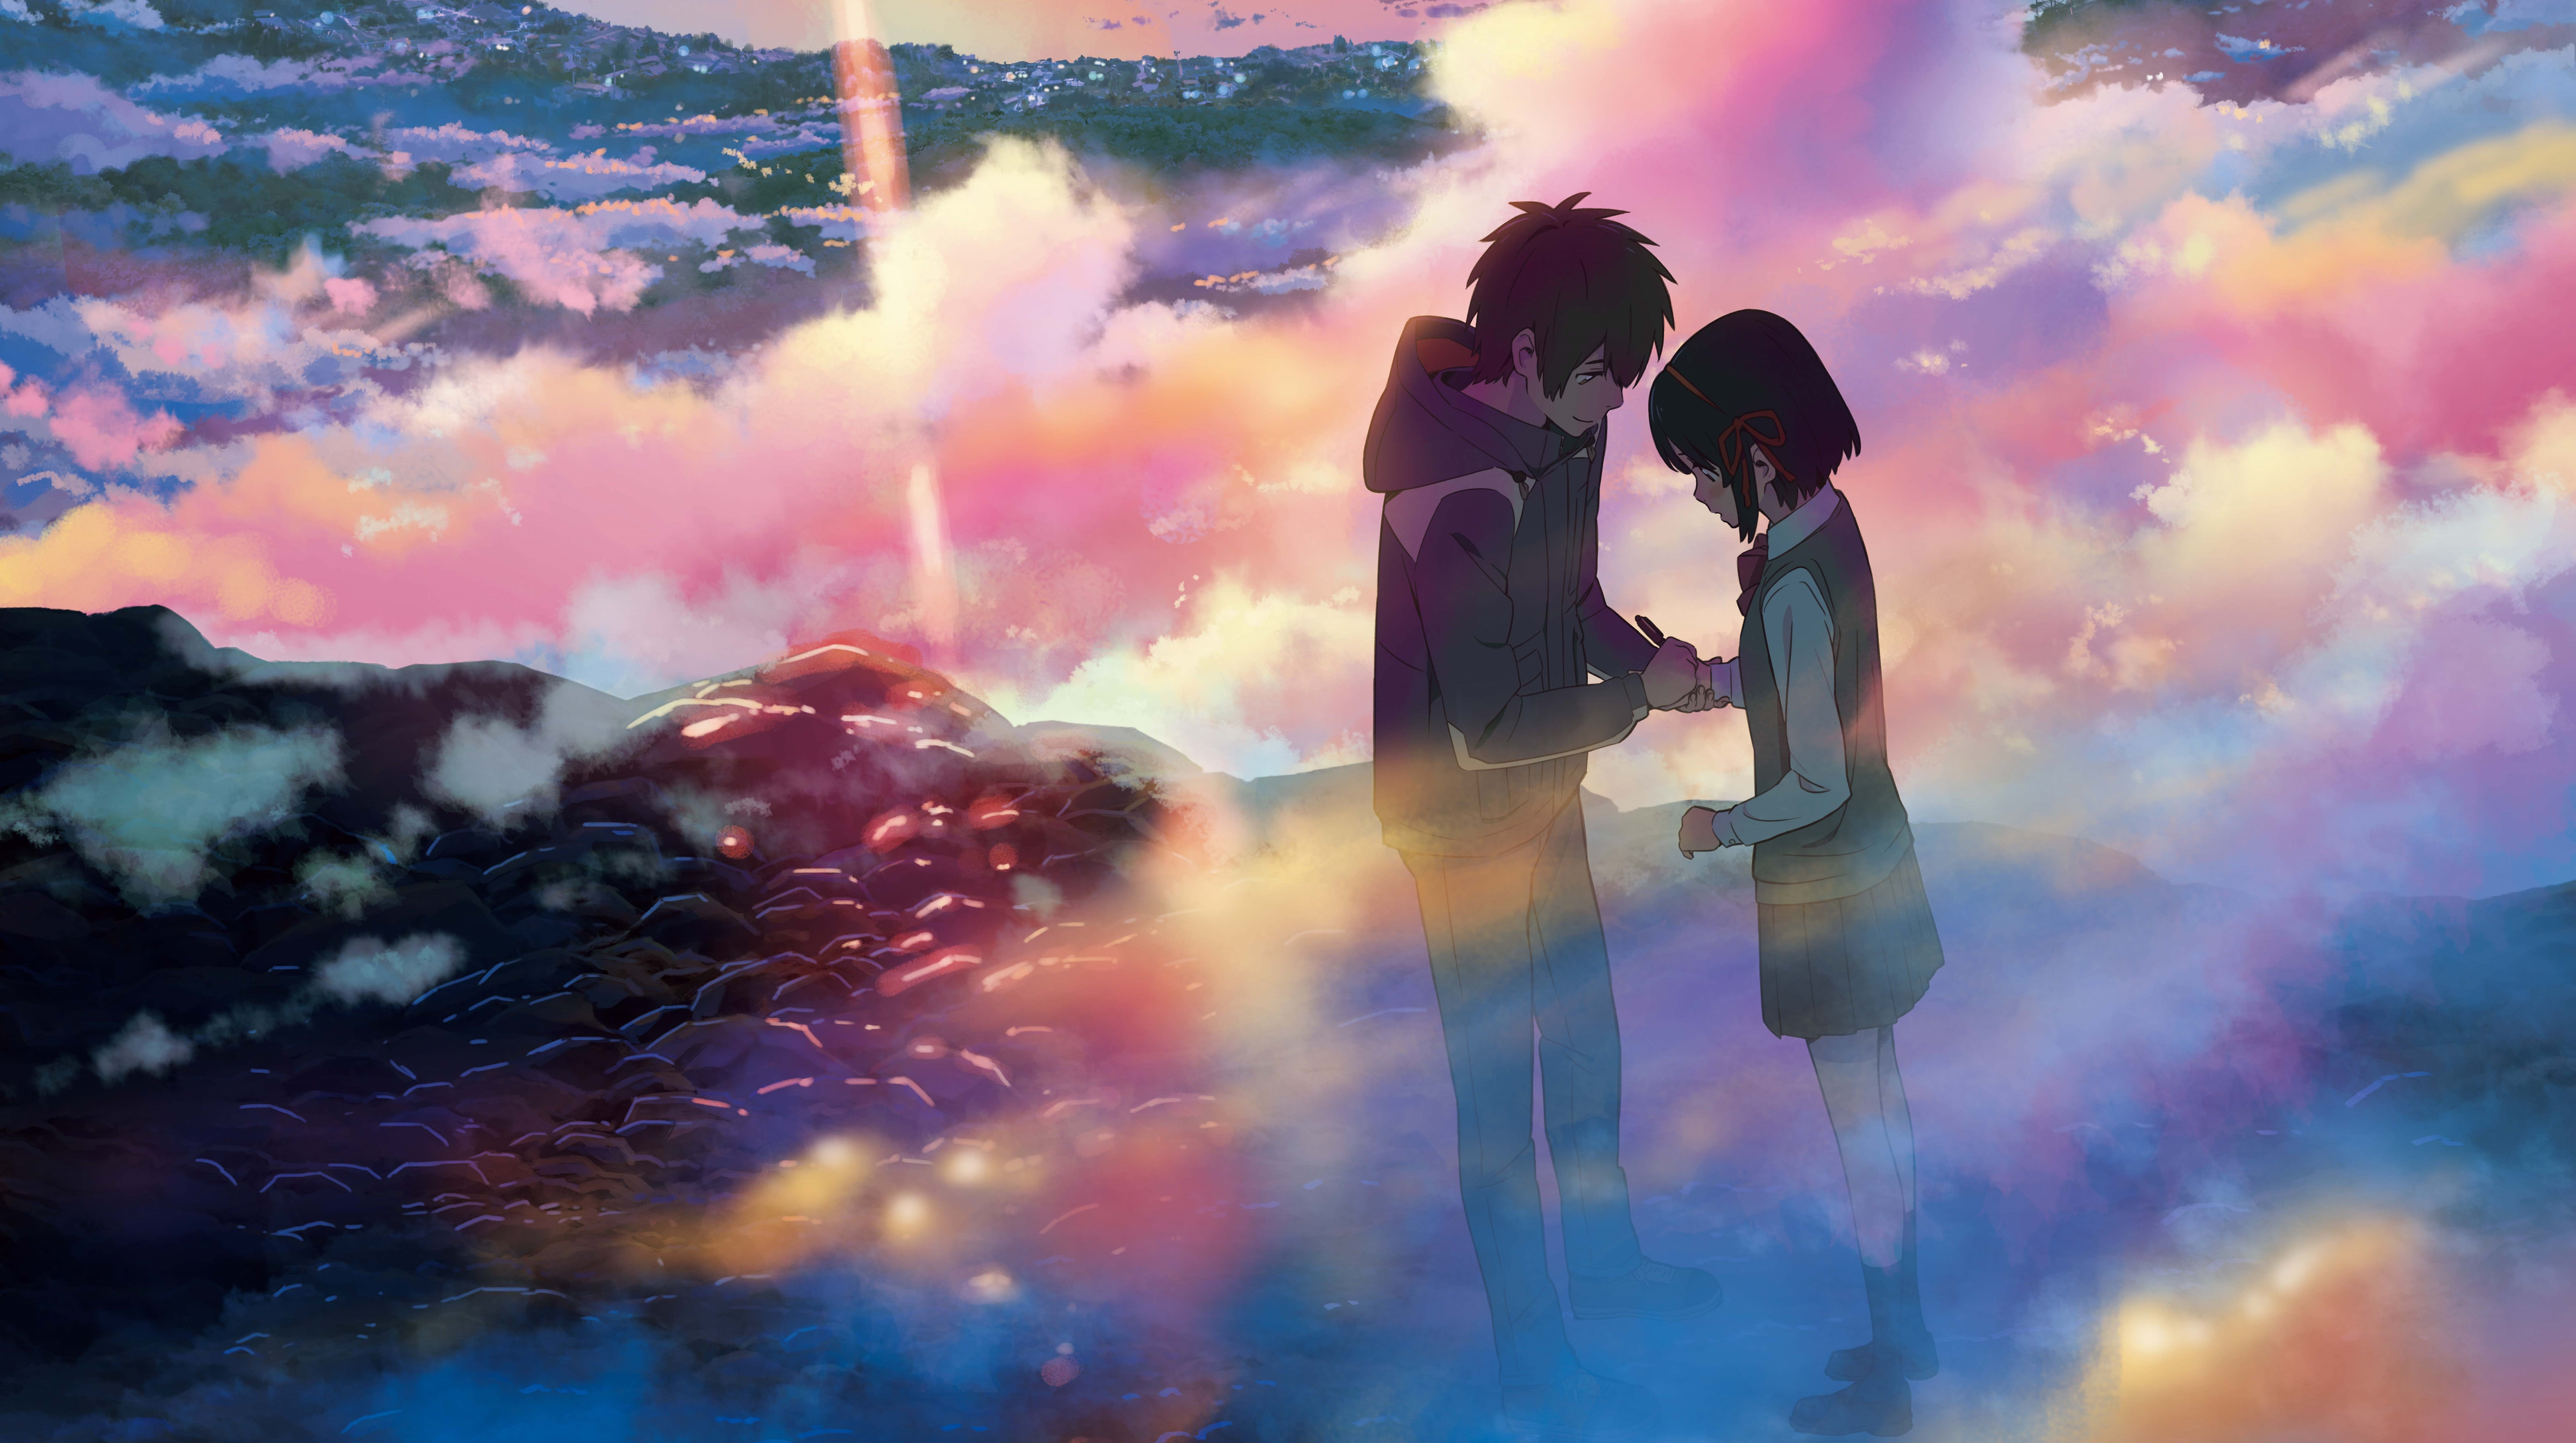 boy and girl holding hands standing on rock wallpaper, Your Name anime wallpaper